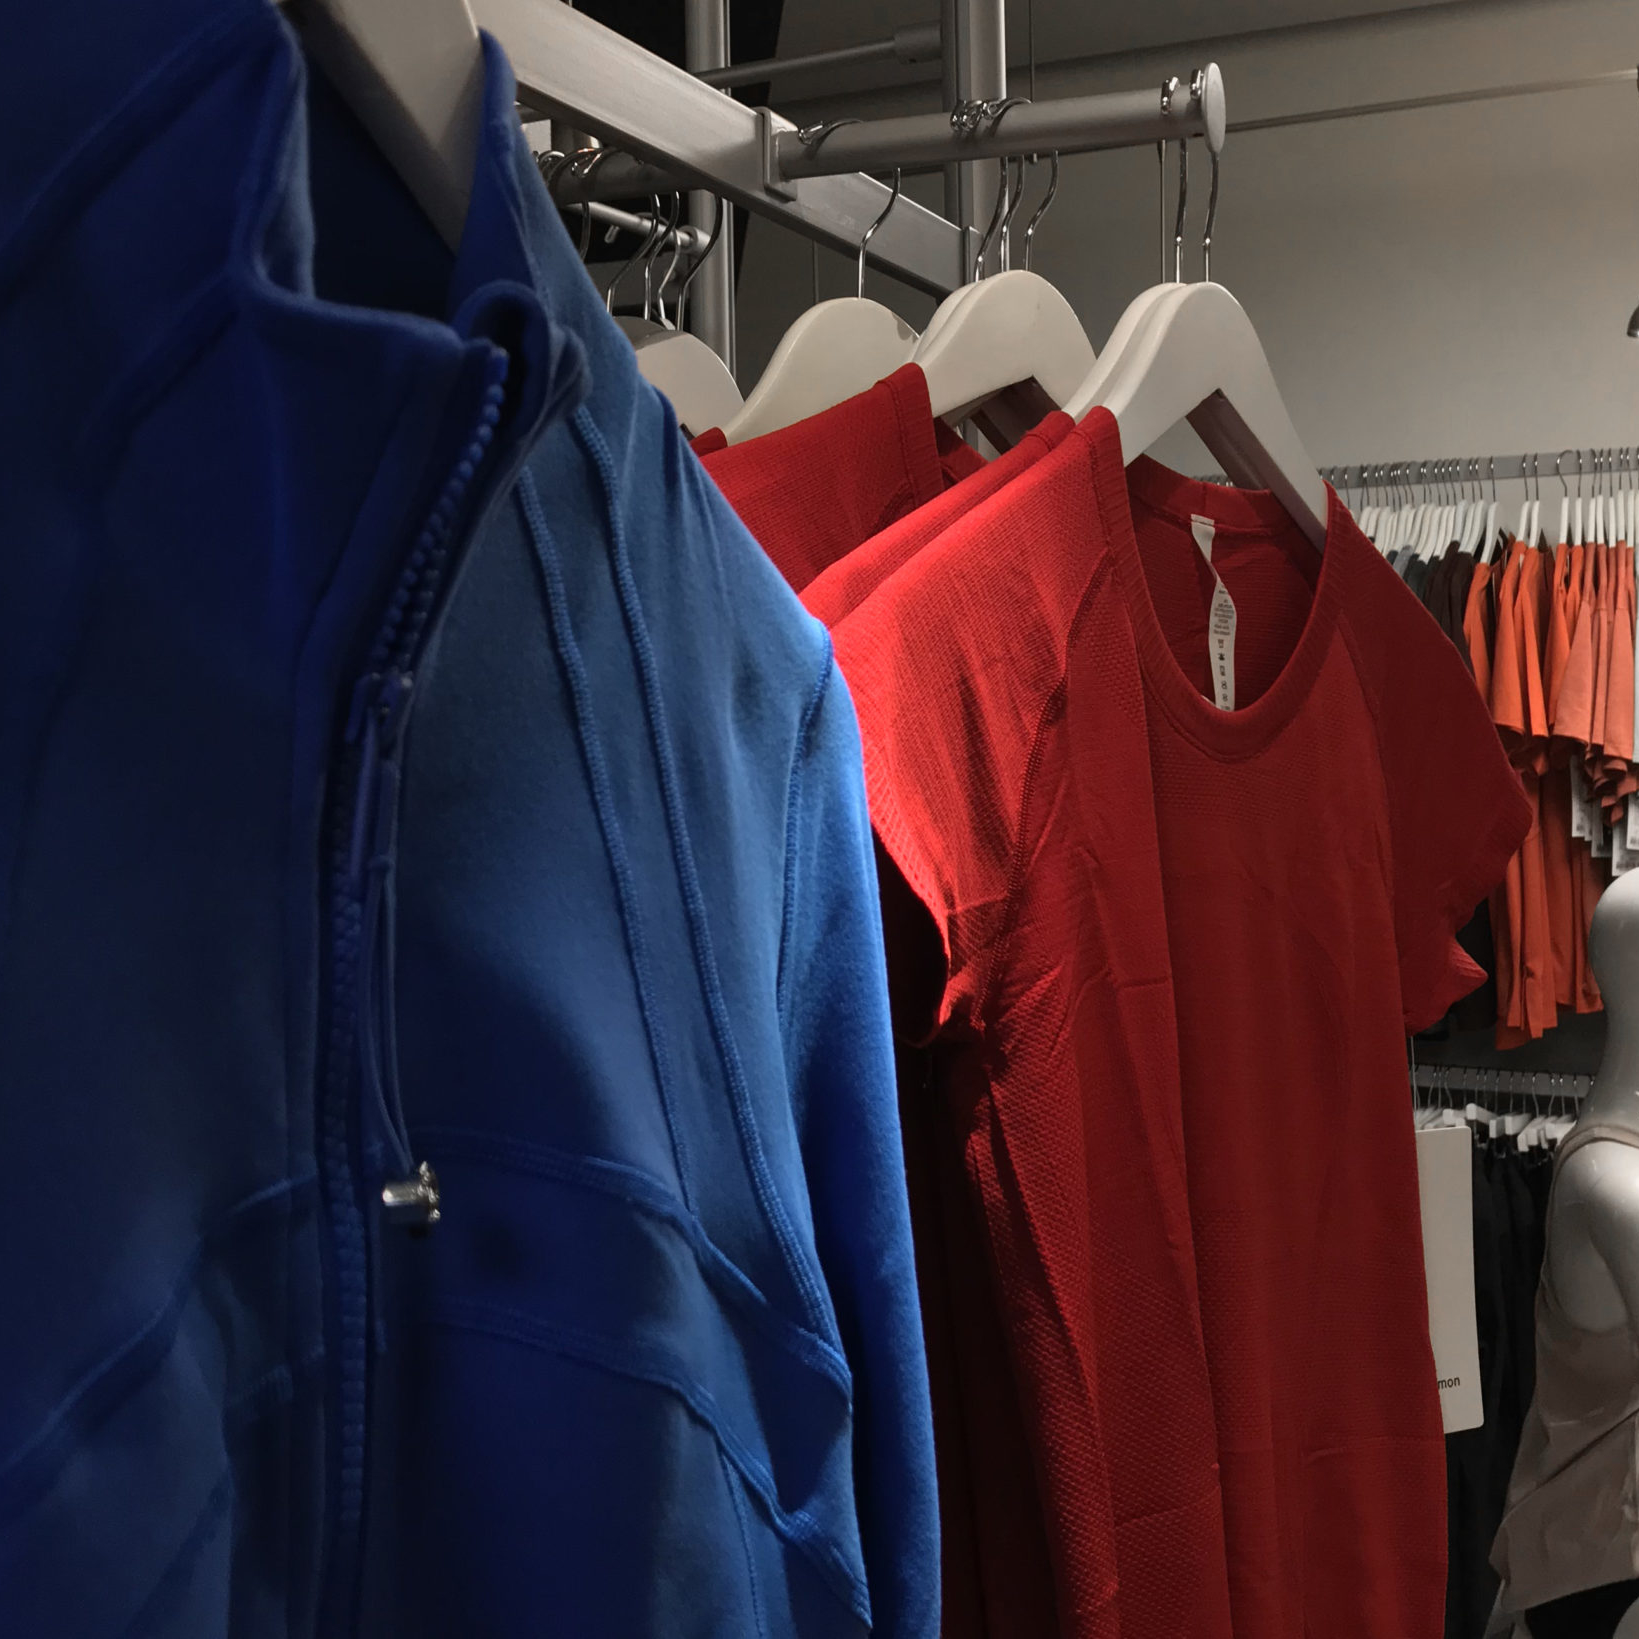 Light jackets and workout shirts on hangers, displayed at the Zenergy boutique.